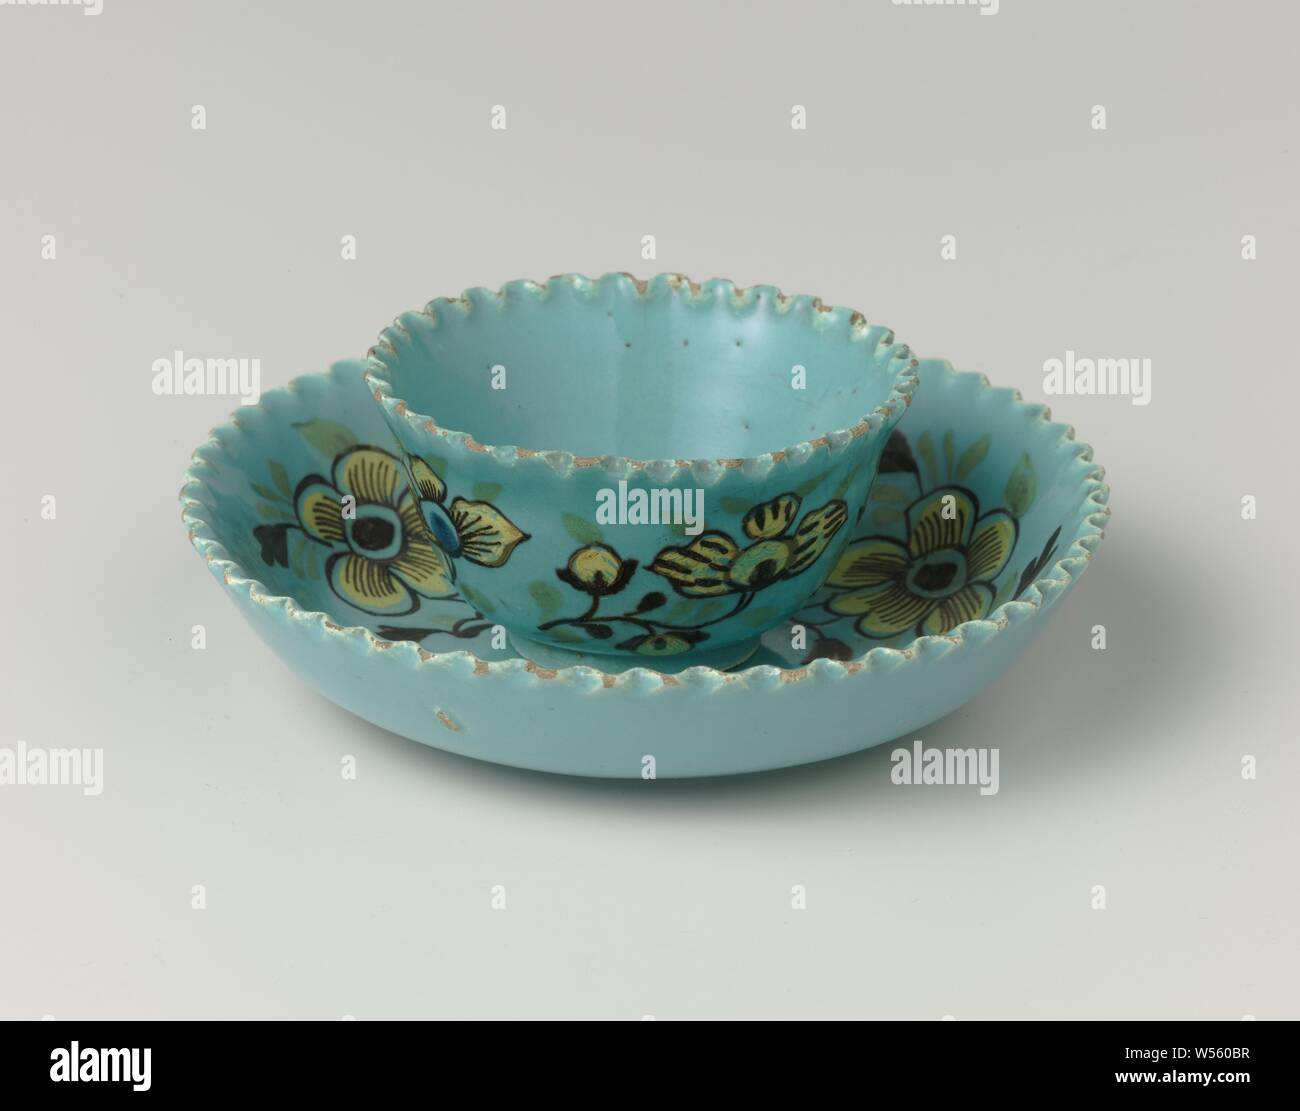 Head, Head of multicolored painted faience. The cup and saucer are painted with yellow flowers on a turquoise background. The edges of the dish are serrated., anonymous, Delft, c. 1720 - c. 1750, earthenware, tin glaze, h 3.8 cm × d 6.5 cm Stock Photo